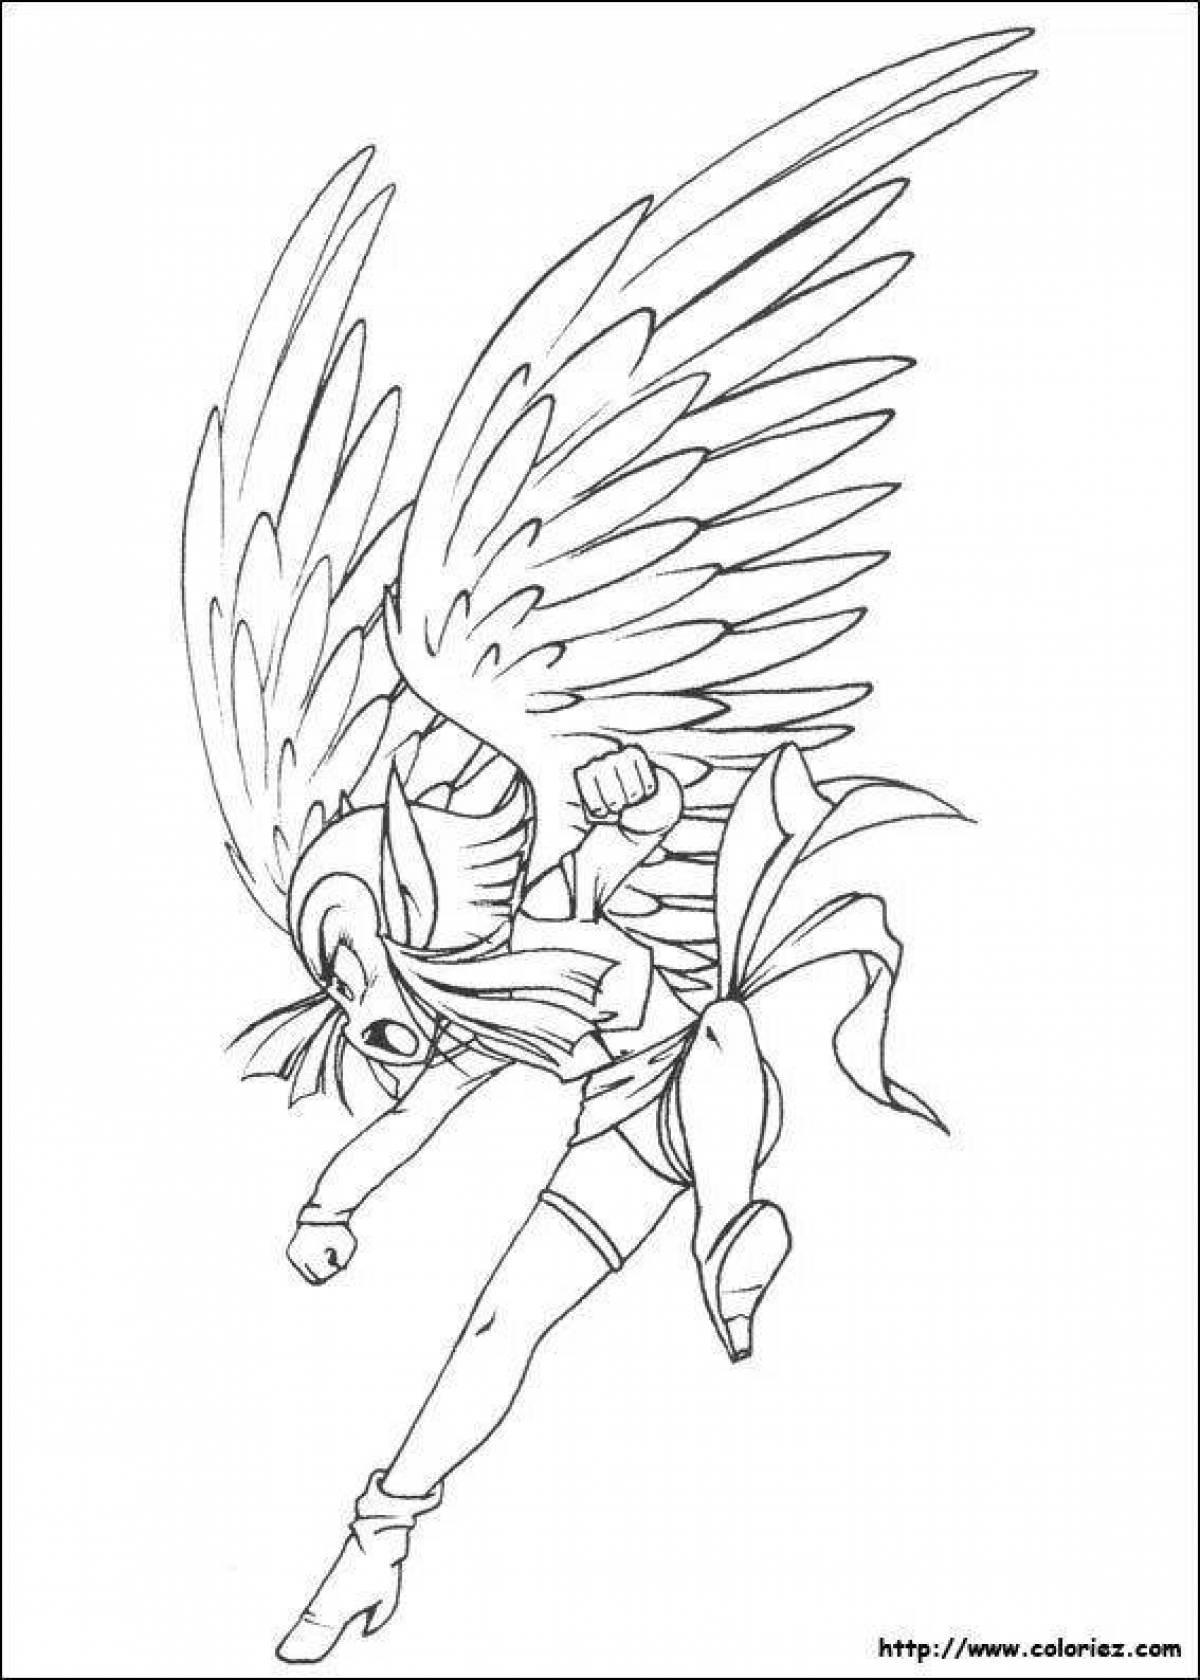 Glorious Spark of Legend coloring page